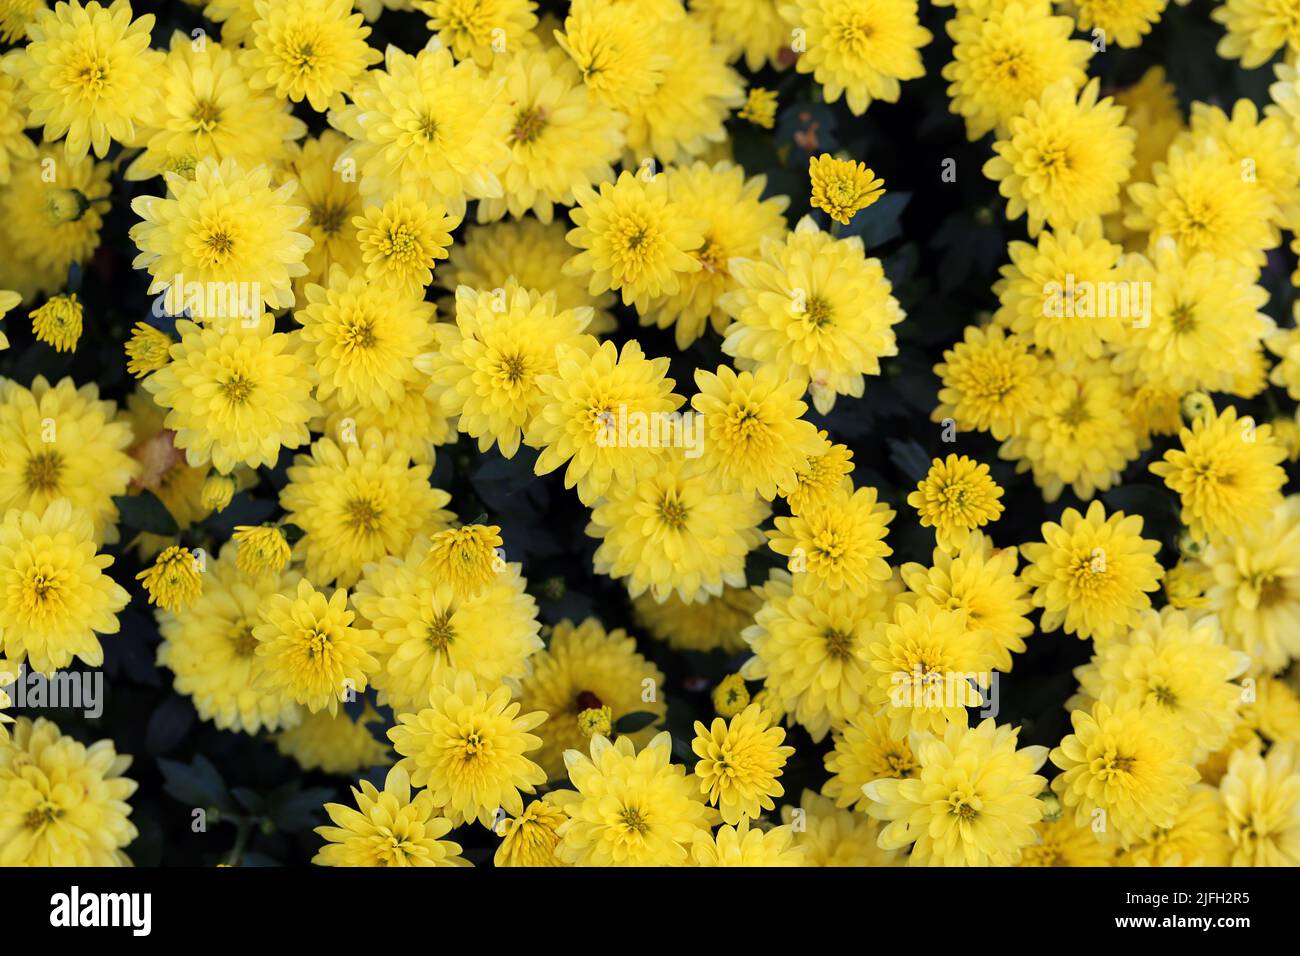 Chrysanthemum (fin: krysanteemi) flower field photographed in Finland. Plenty of beautiful bright yellow flowers photographed from a high angle view. Stock Photo